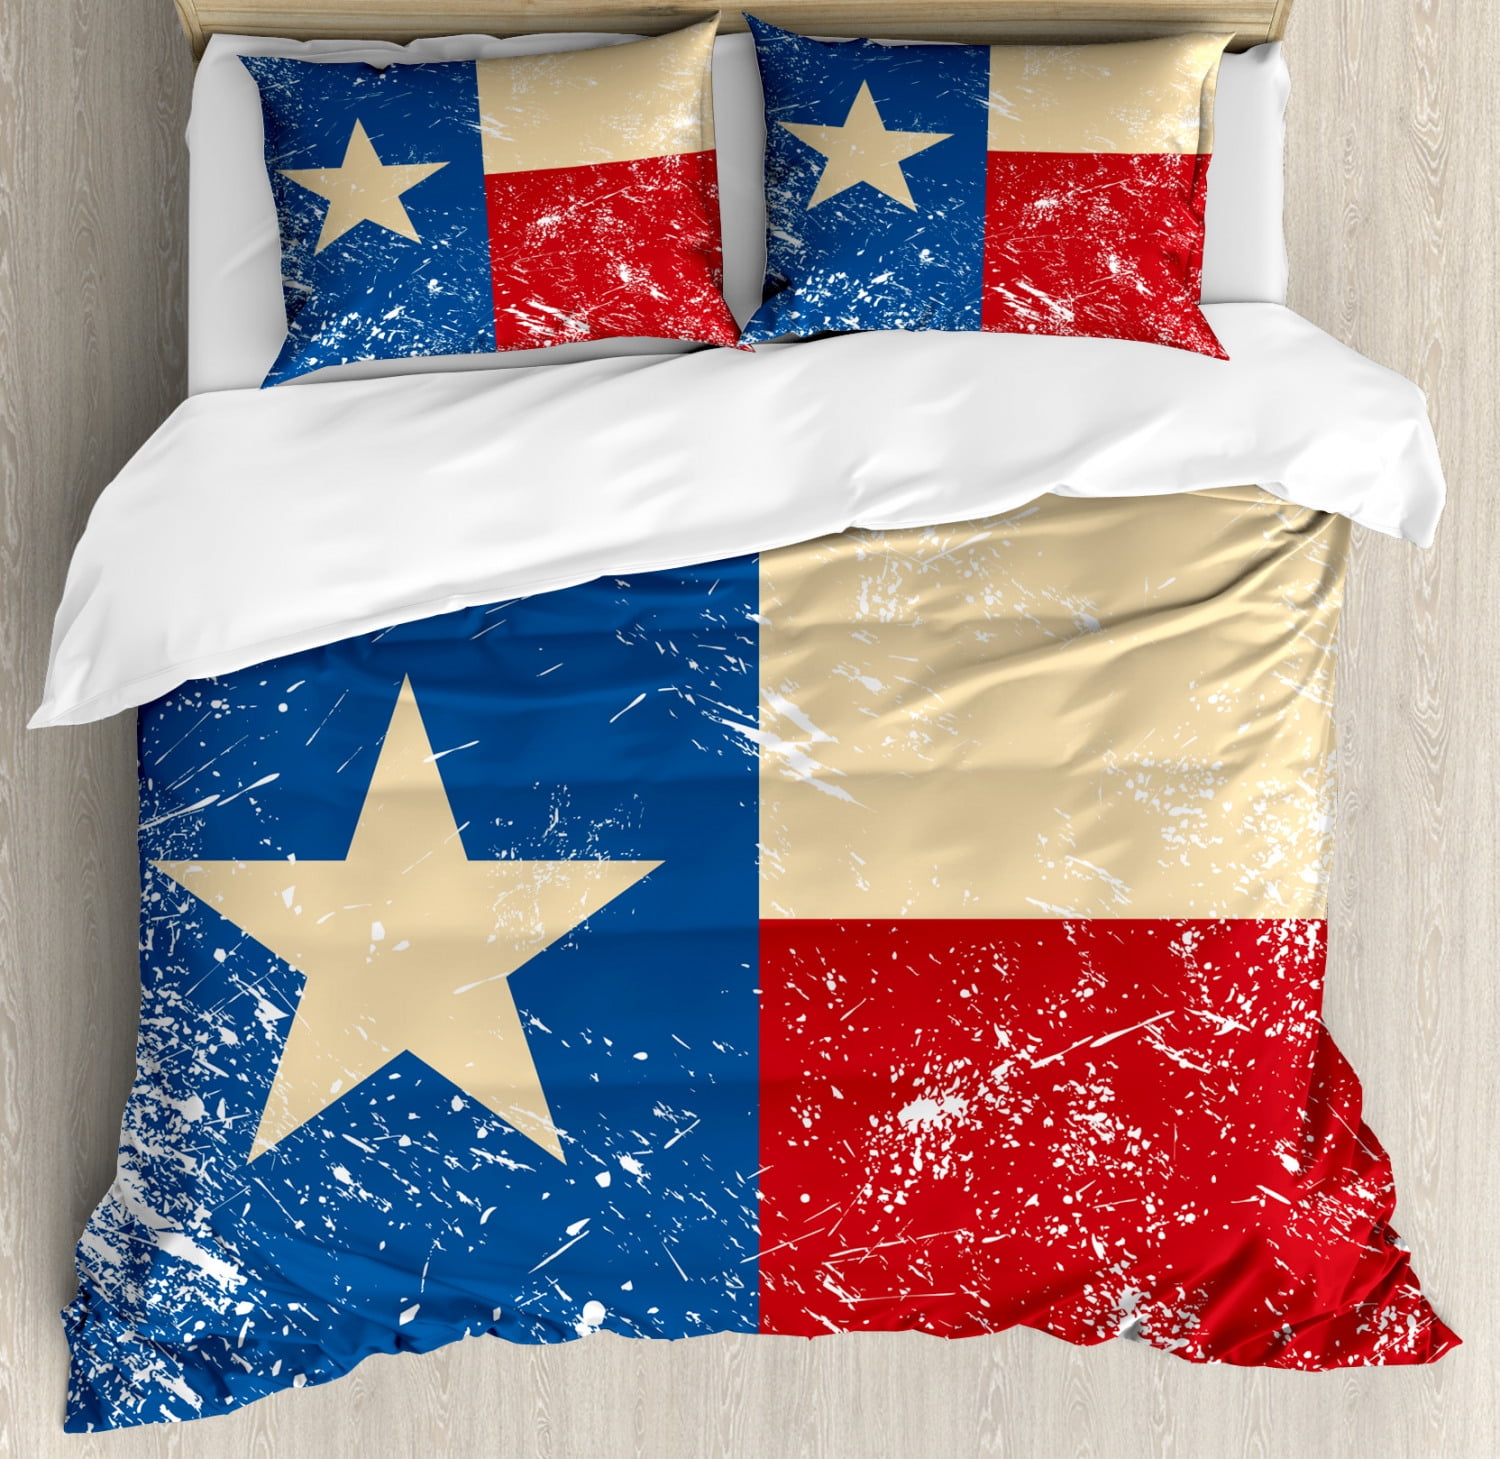 Texas Star Duvet Cover Set King Size, Blue And Gold King Size Duvet Cover Set